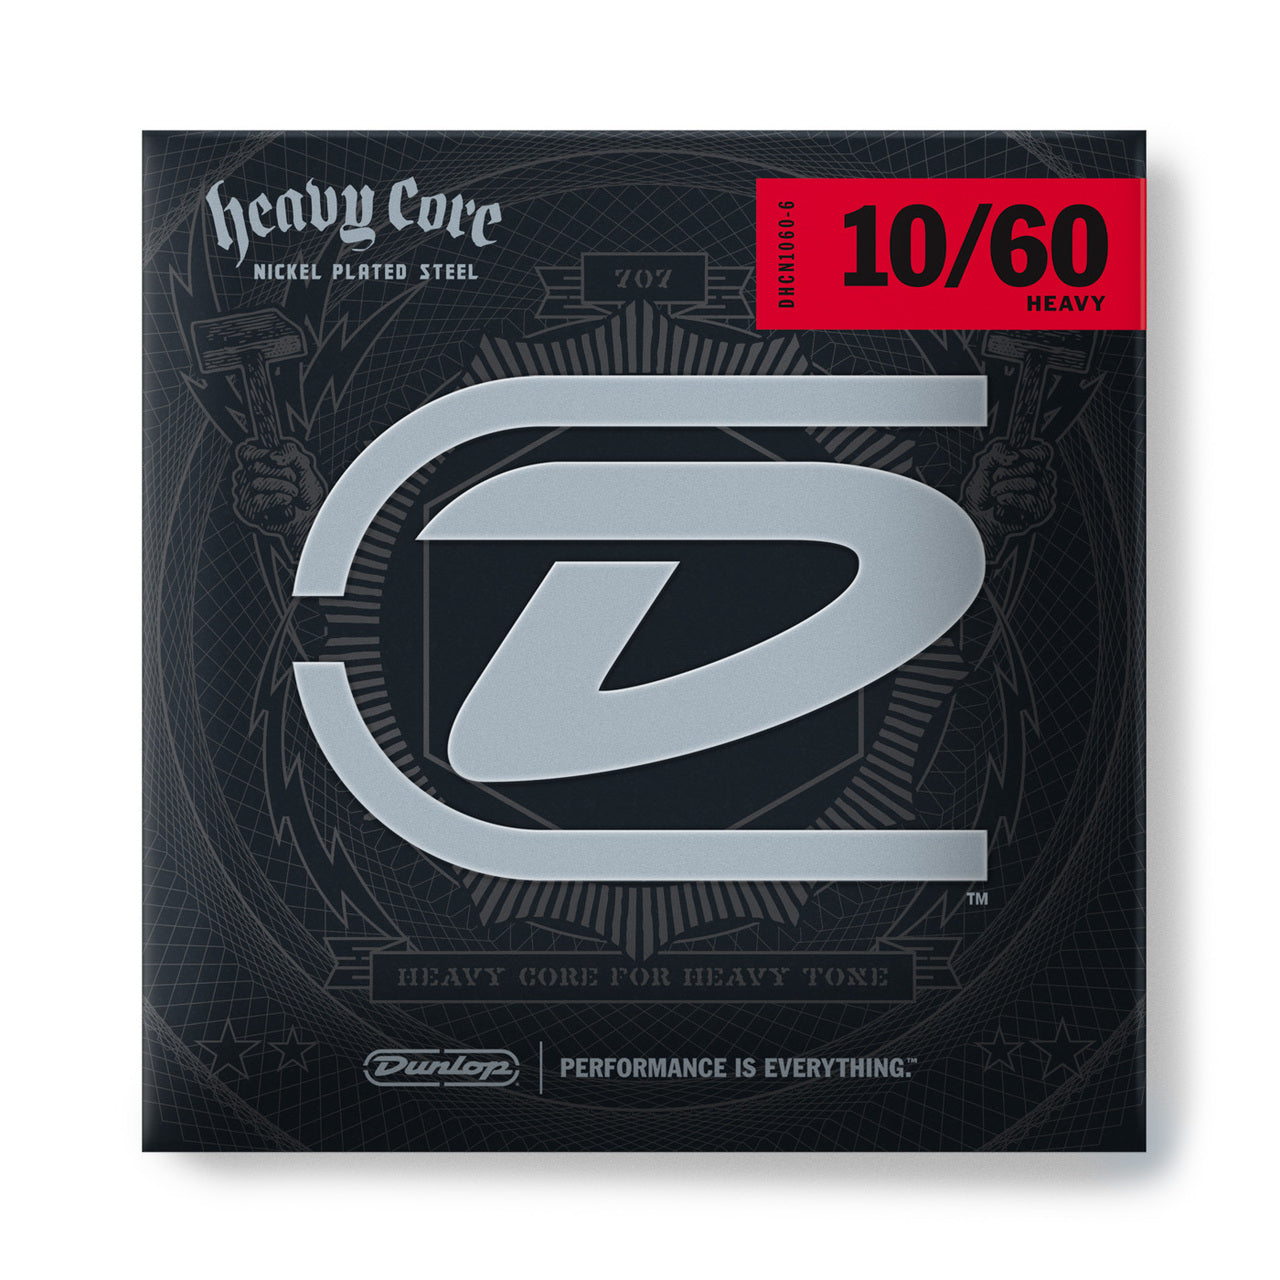 Dunlop Nickel Wound Heavy Core Electric Guitar Strings